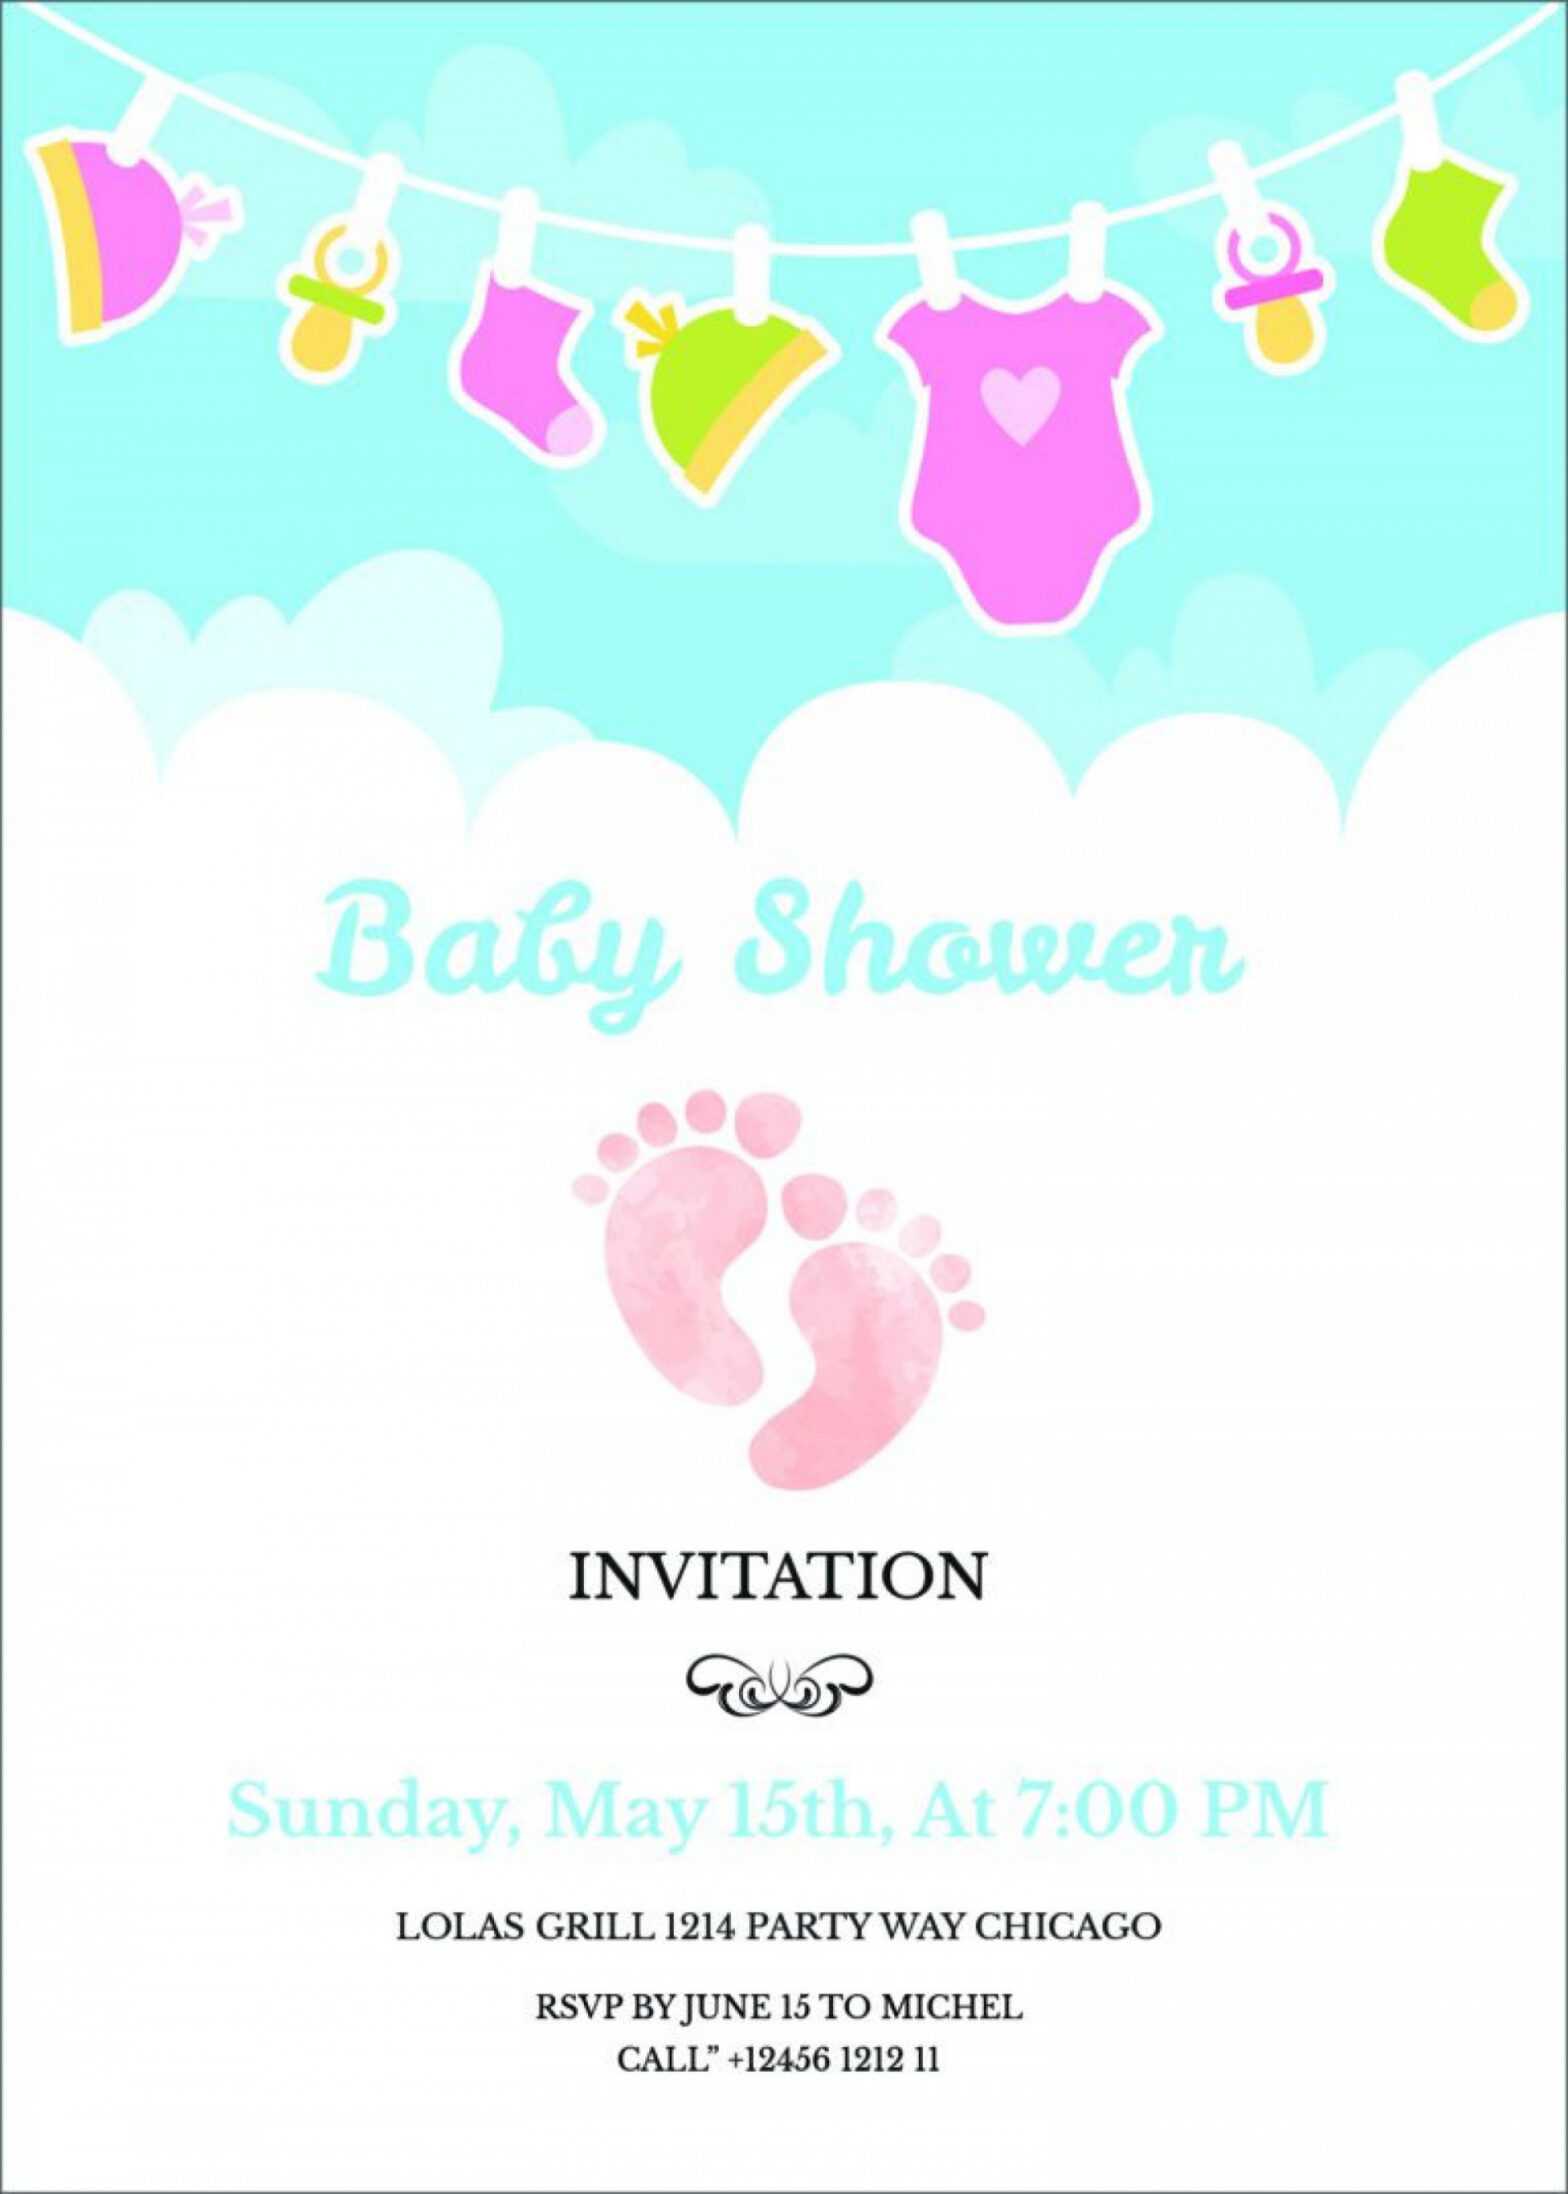 Baby Shower Flyer Template ~ Addictionary with Baby Shower Flyer Template